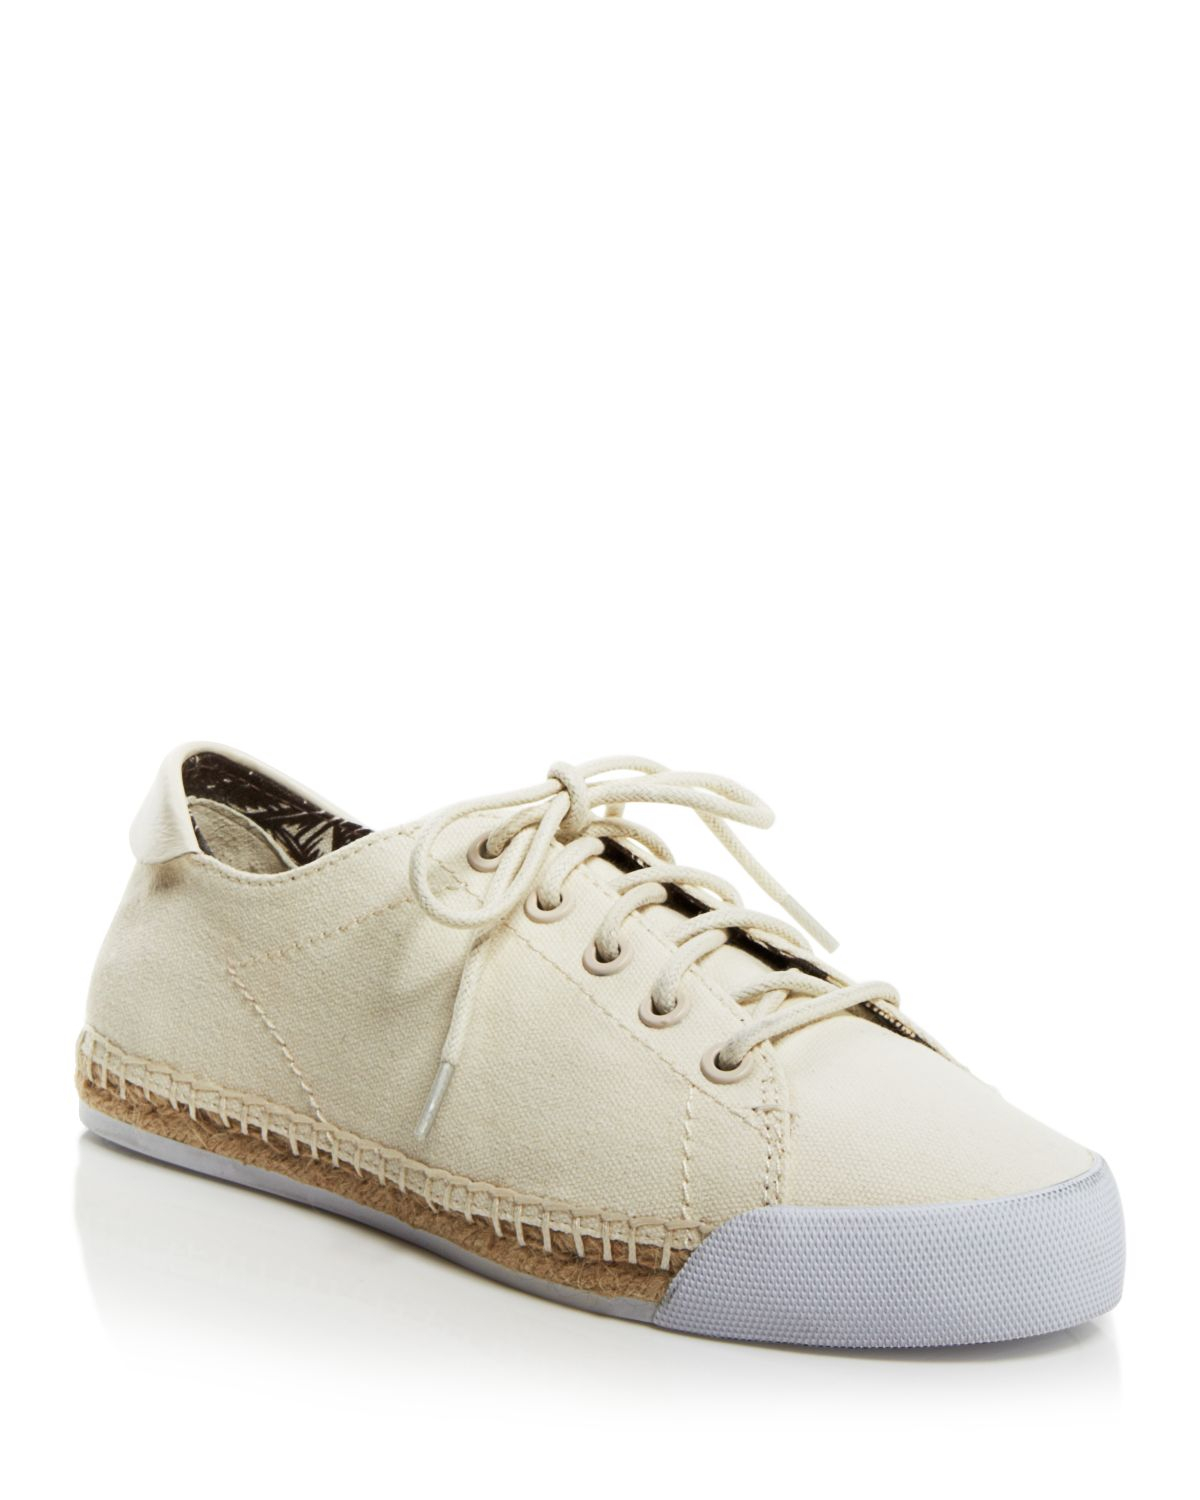 Lyst - Tory Burch Flat Lace Up Sneakers - Espadrille in White